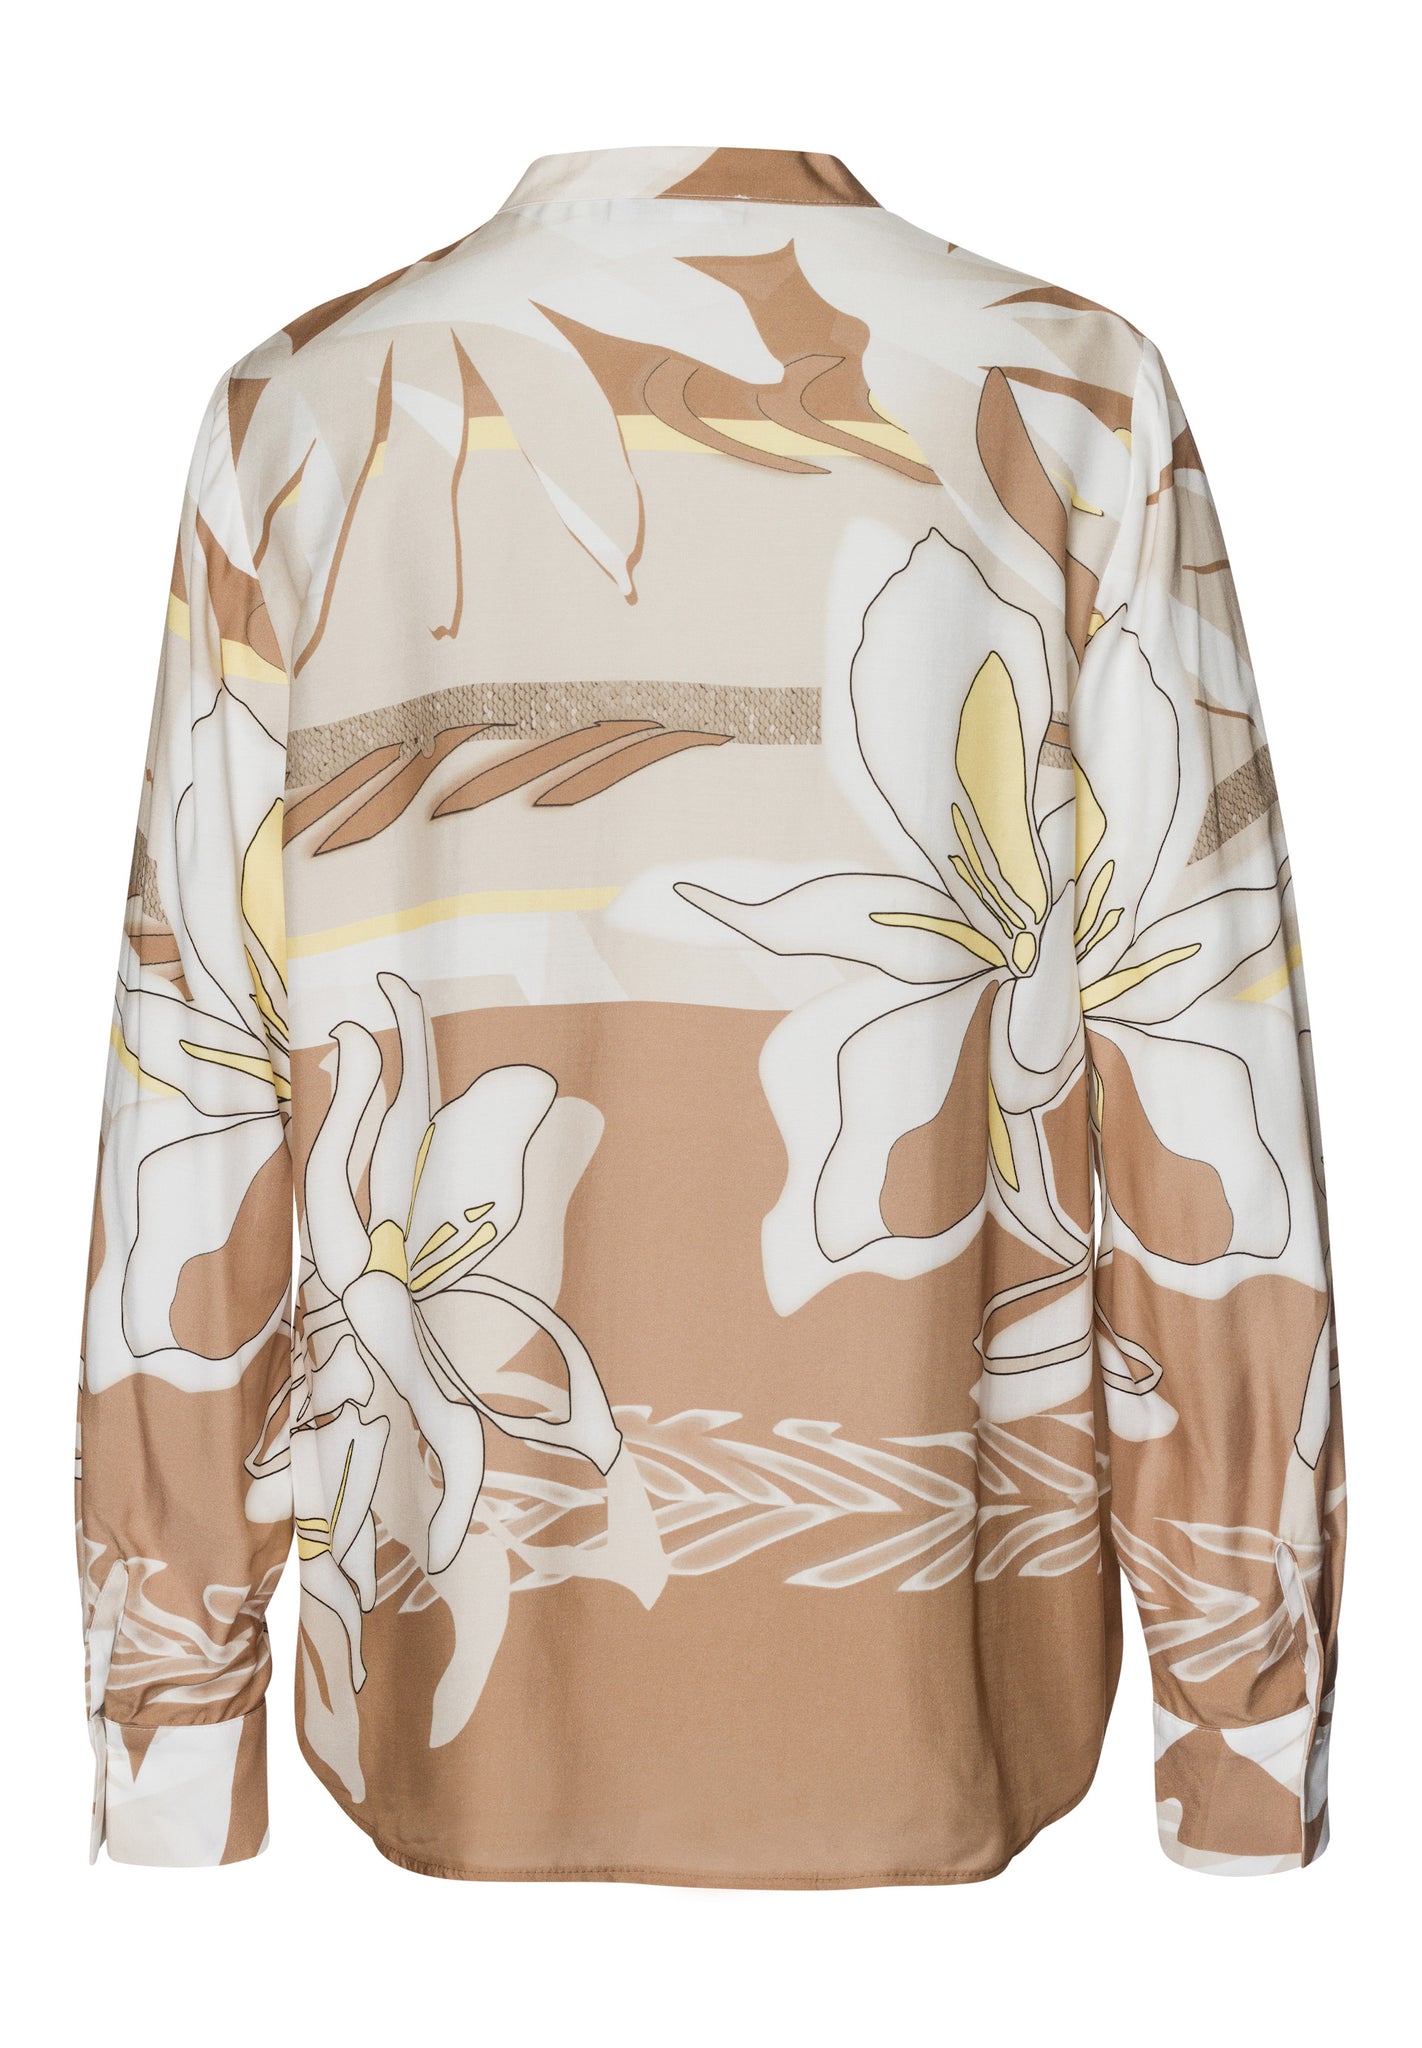 Frank walder Caffè De Roma collection printed blouse in tan, neutrals and yellow

Product code 202.102